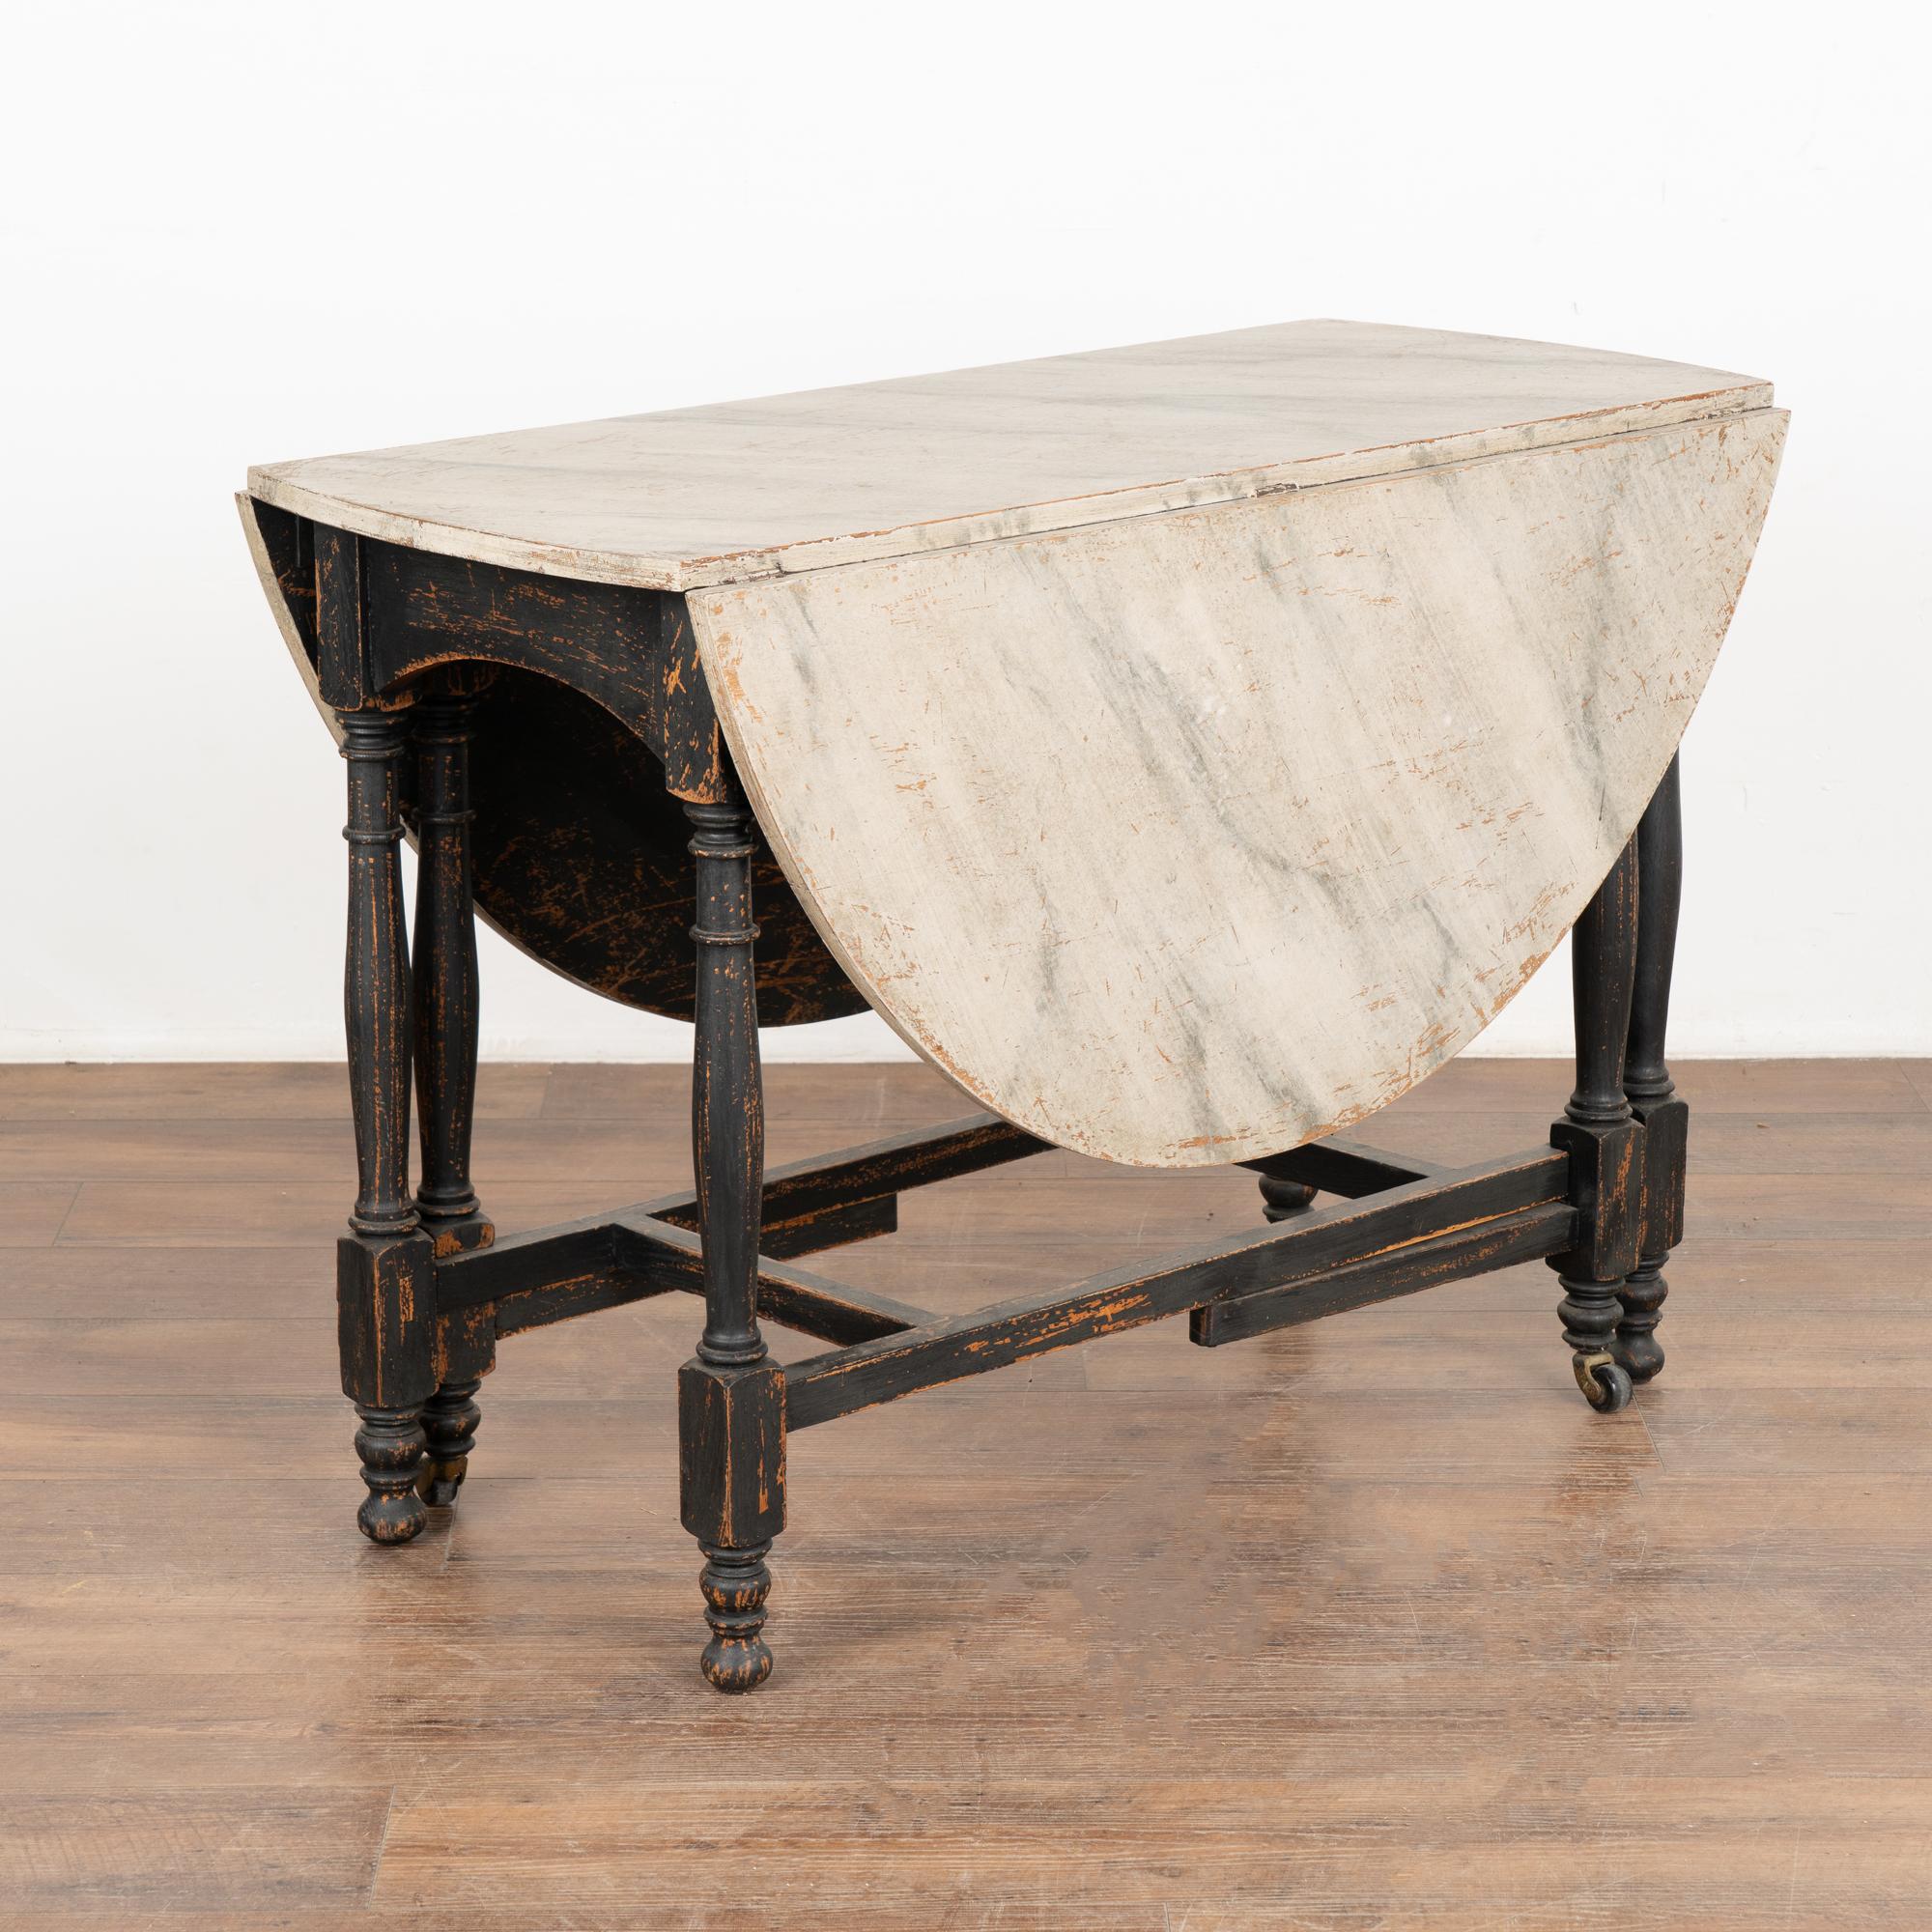 There is wonderful charisma to this drop leaf gate leg table due to the varied colors of the faux marble painted top, which was a favorite style element in the 1800's.
This type of drop leaf was common in Sweden, as they were experts in utilizing